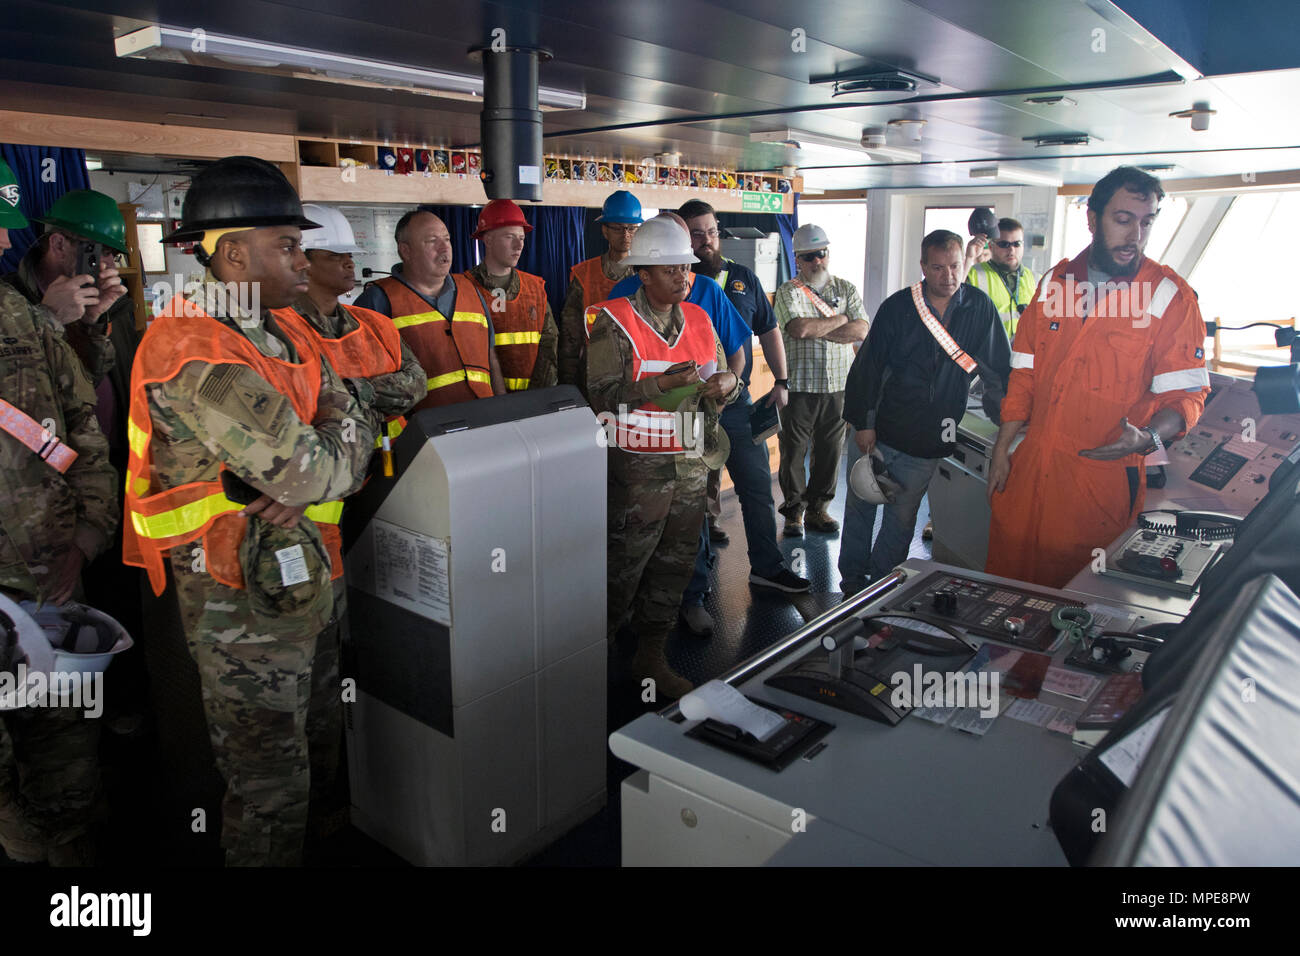 Adler Scott, 3rd Mate of the “Alliance Norfolk” vessel, (right), talks about safety procedures and vessel capabilities during the 2017 Worldwide Ammunition Logistics and Explosives Safety Review in Shuaiba Port, Kuwait, on Feb. 10, 2017. (U.S. Army Photo by Staff Sgt. Dalton Smith) Stock Photo